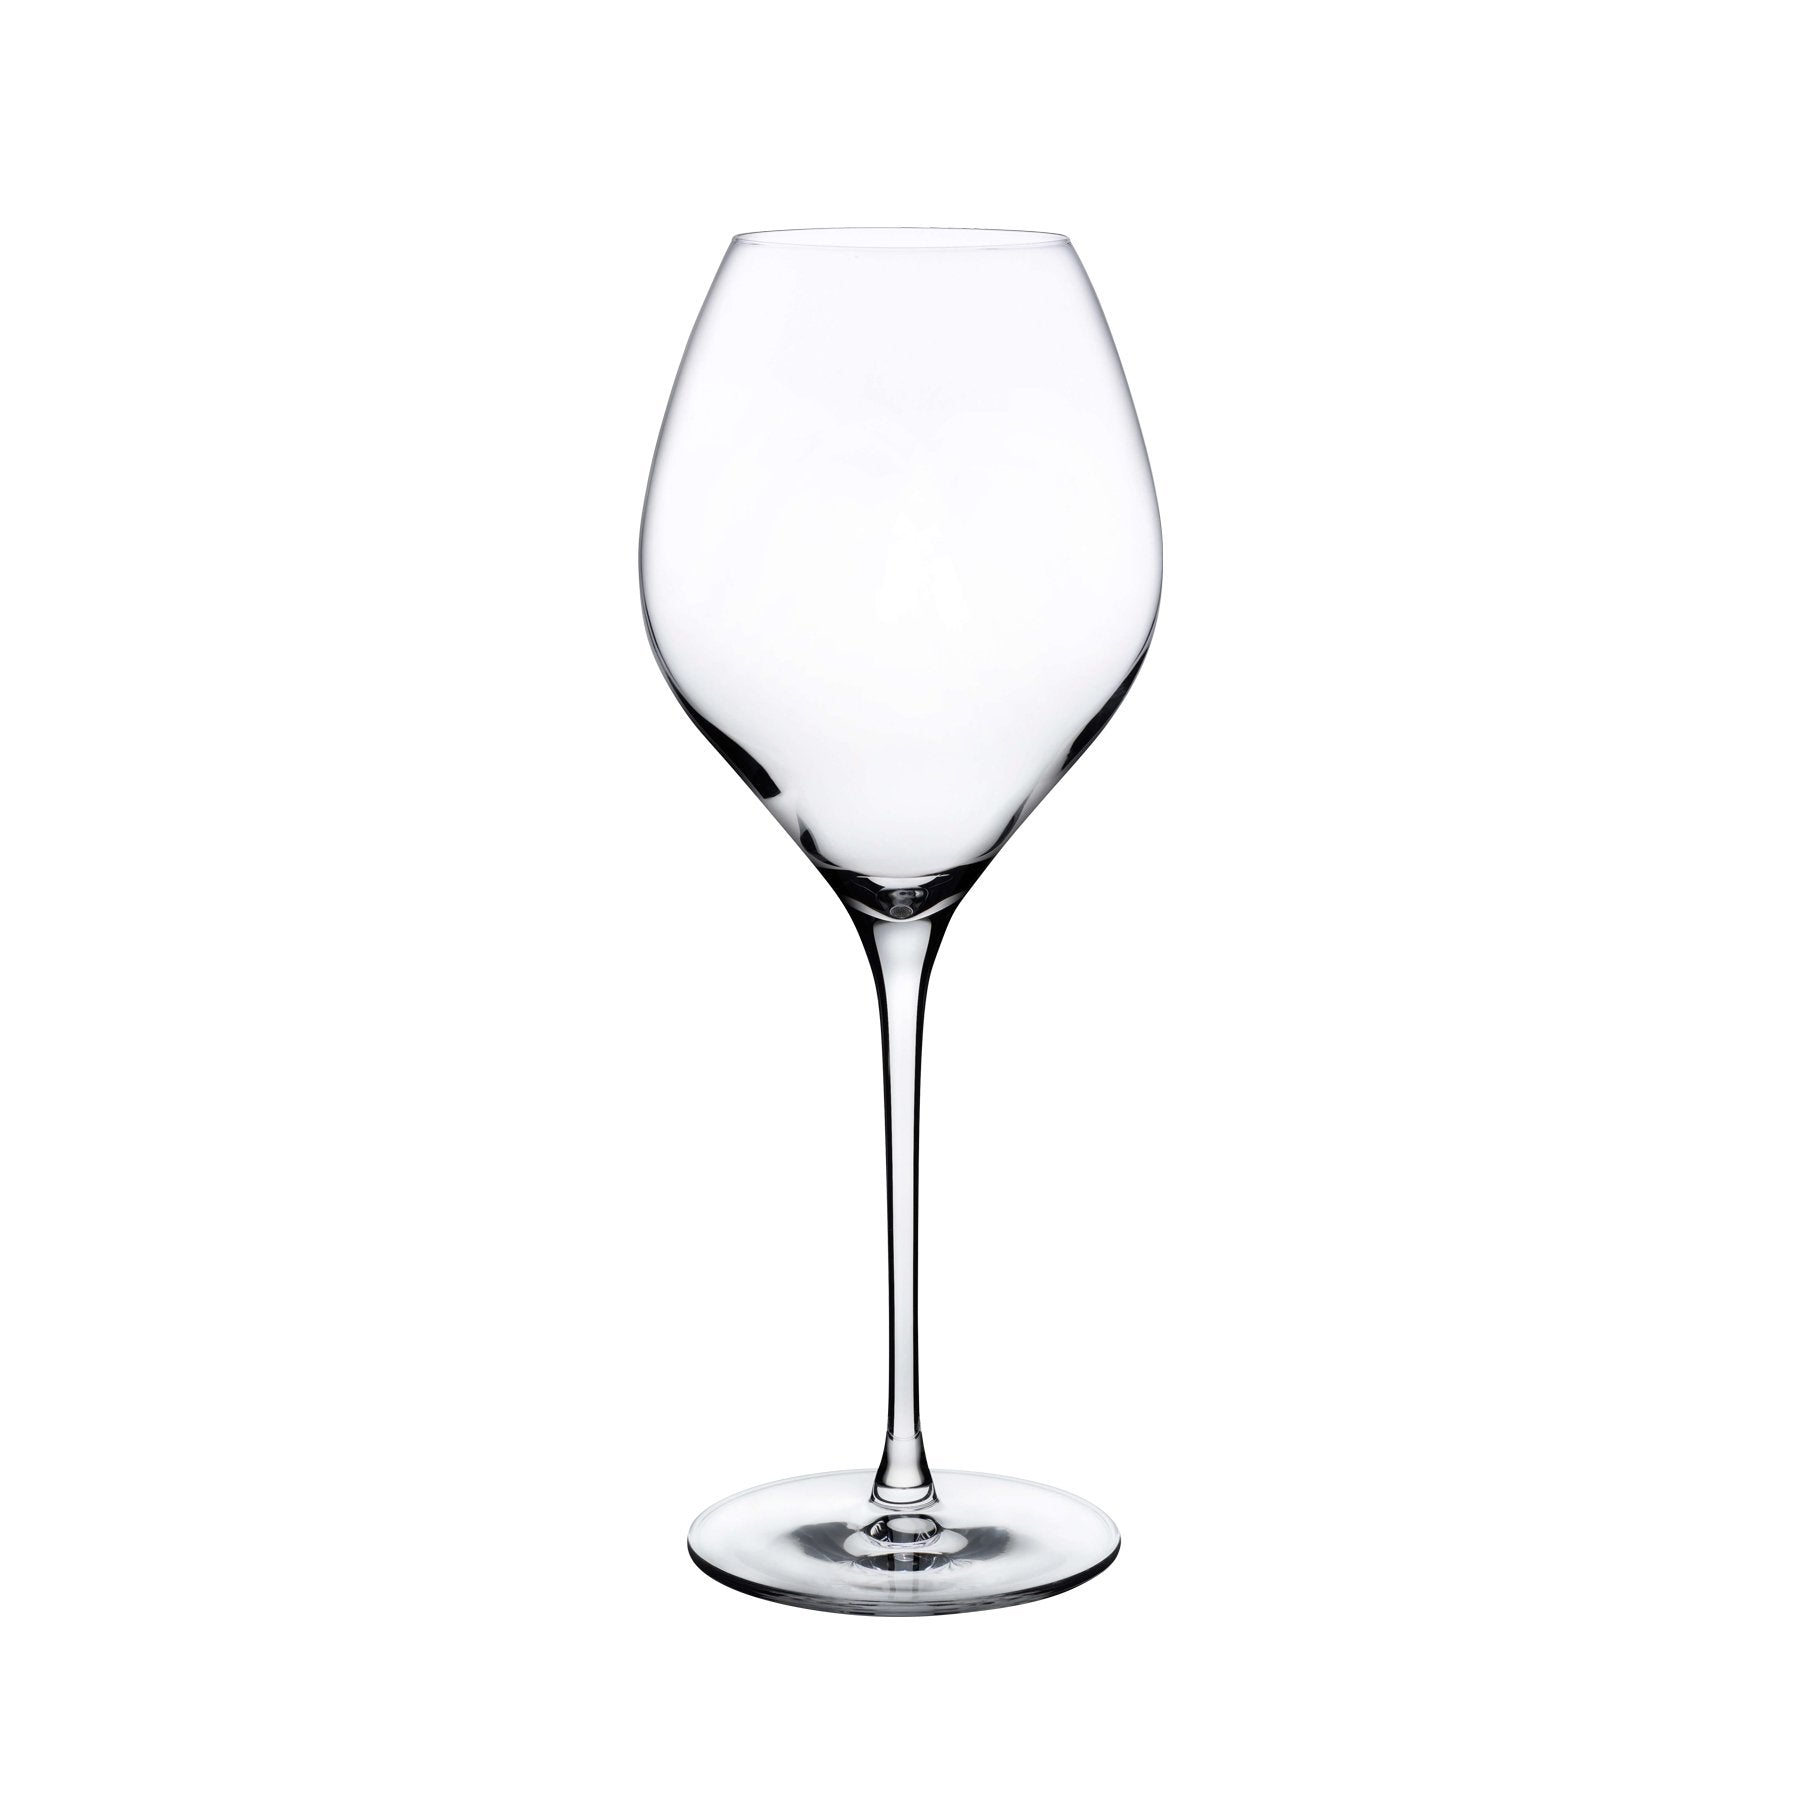 Nude Glass Dimple Aromatic White Wine Glass, Set of 2